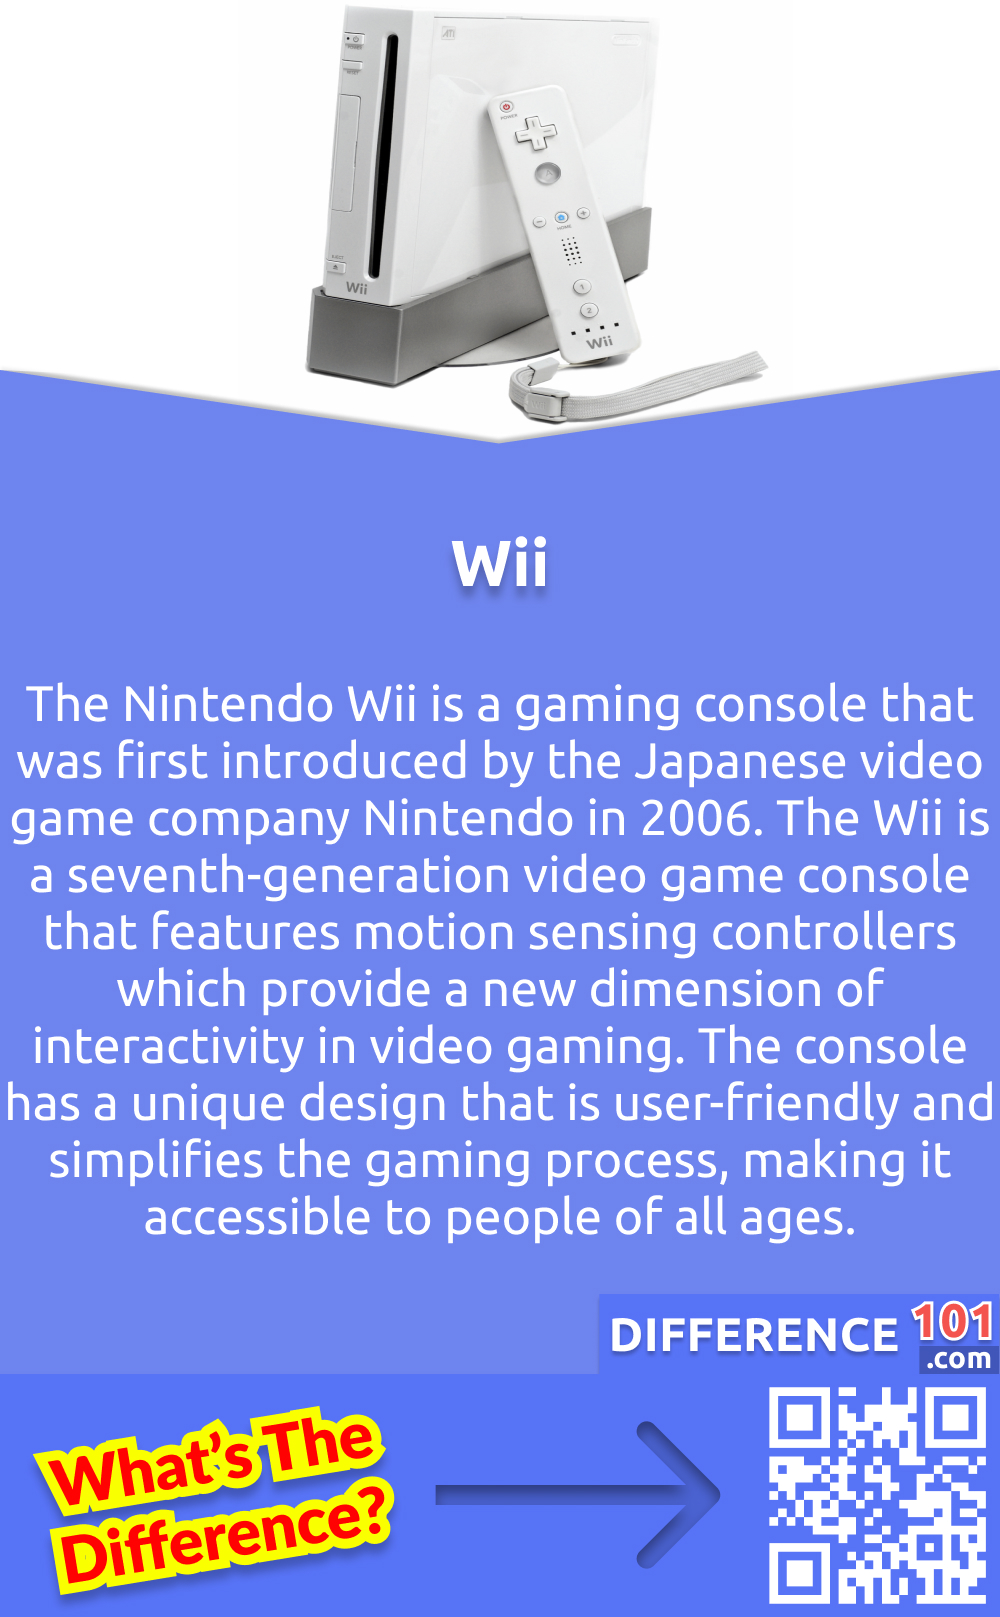 What Is Wii? The Nintendo Wii is a gaming console that was first introduced by the Japanese video game company Nintendo in 2006. It is regarded as a worthy successor to its previous console, GameCube. The Wii is a seventh-generation video game console that features motion sensing controllers which provide a new dimension of interactivity in video gaming. The console has a unique design that is user-friendly and simplifies the gaming process, making it accessible to people of all ages. Its vast selection of games caters to a wide range of demographics and genres, including sports, racing, action, and adventure. Overall, the Nintendo Wii has proven to be a popular and innovative gaming console that has found success among gamers worldwide.